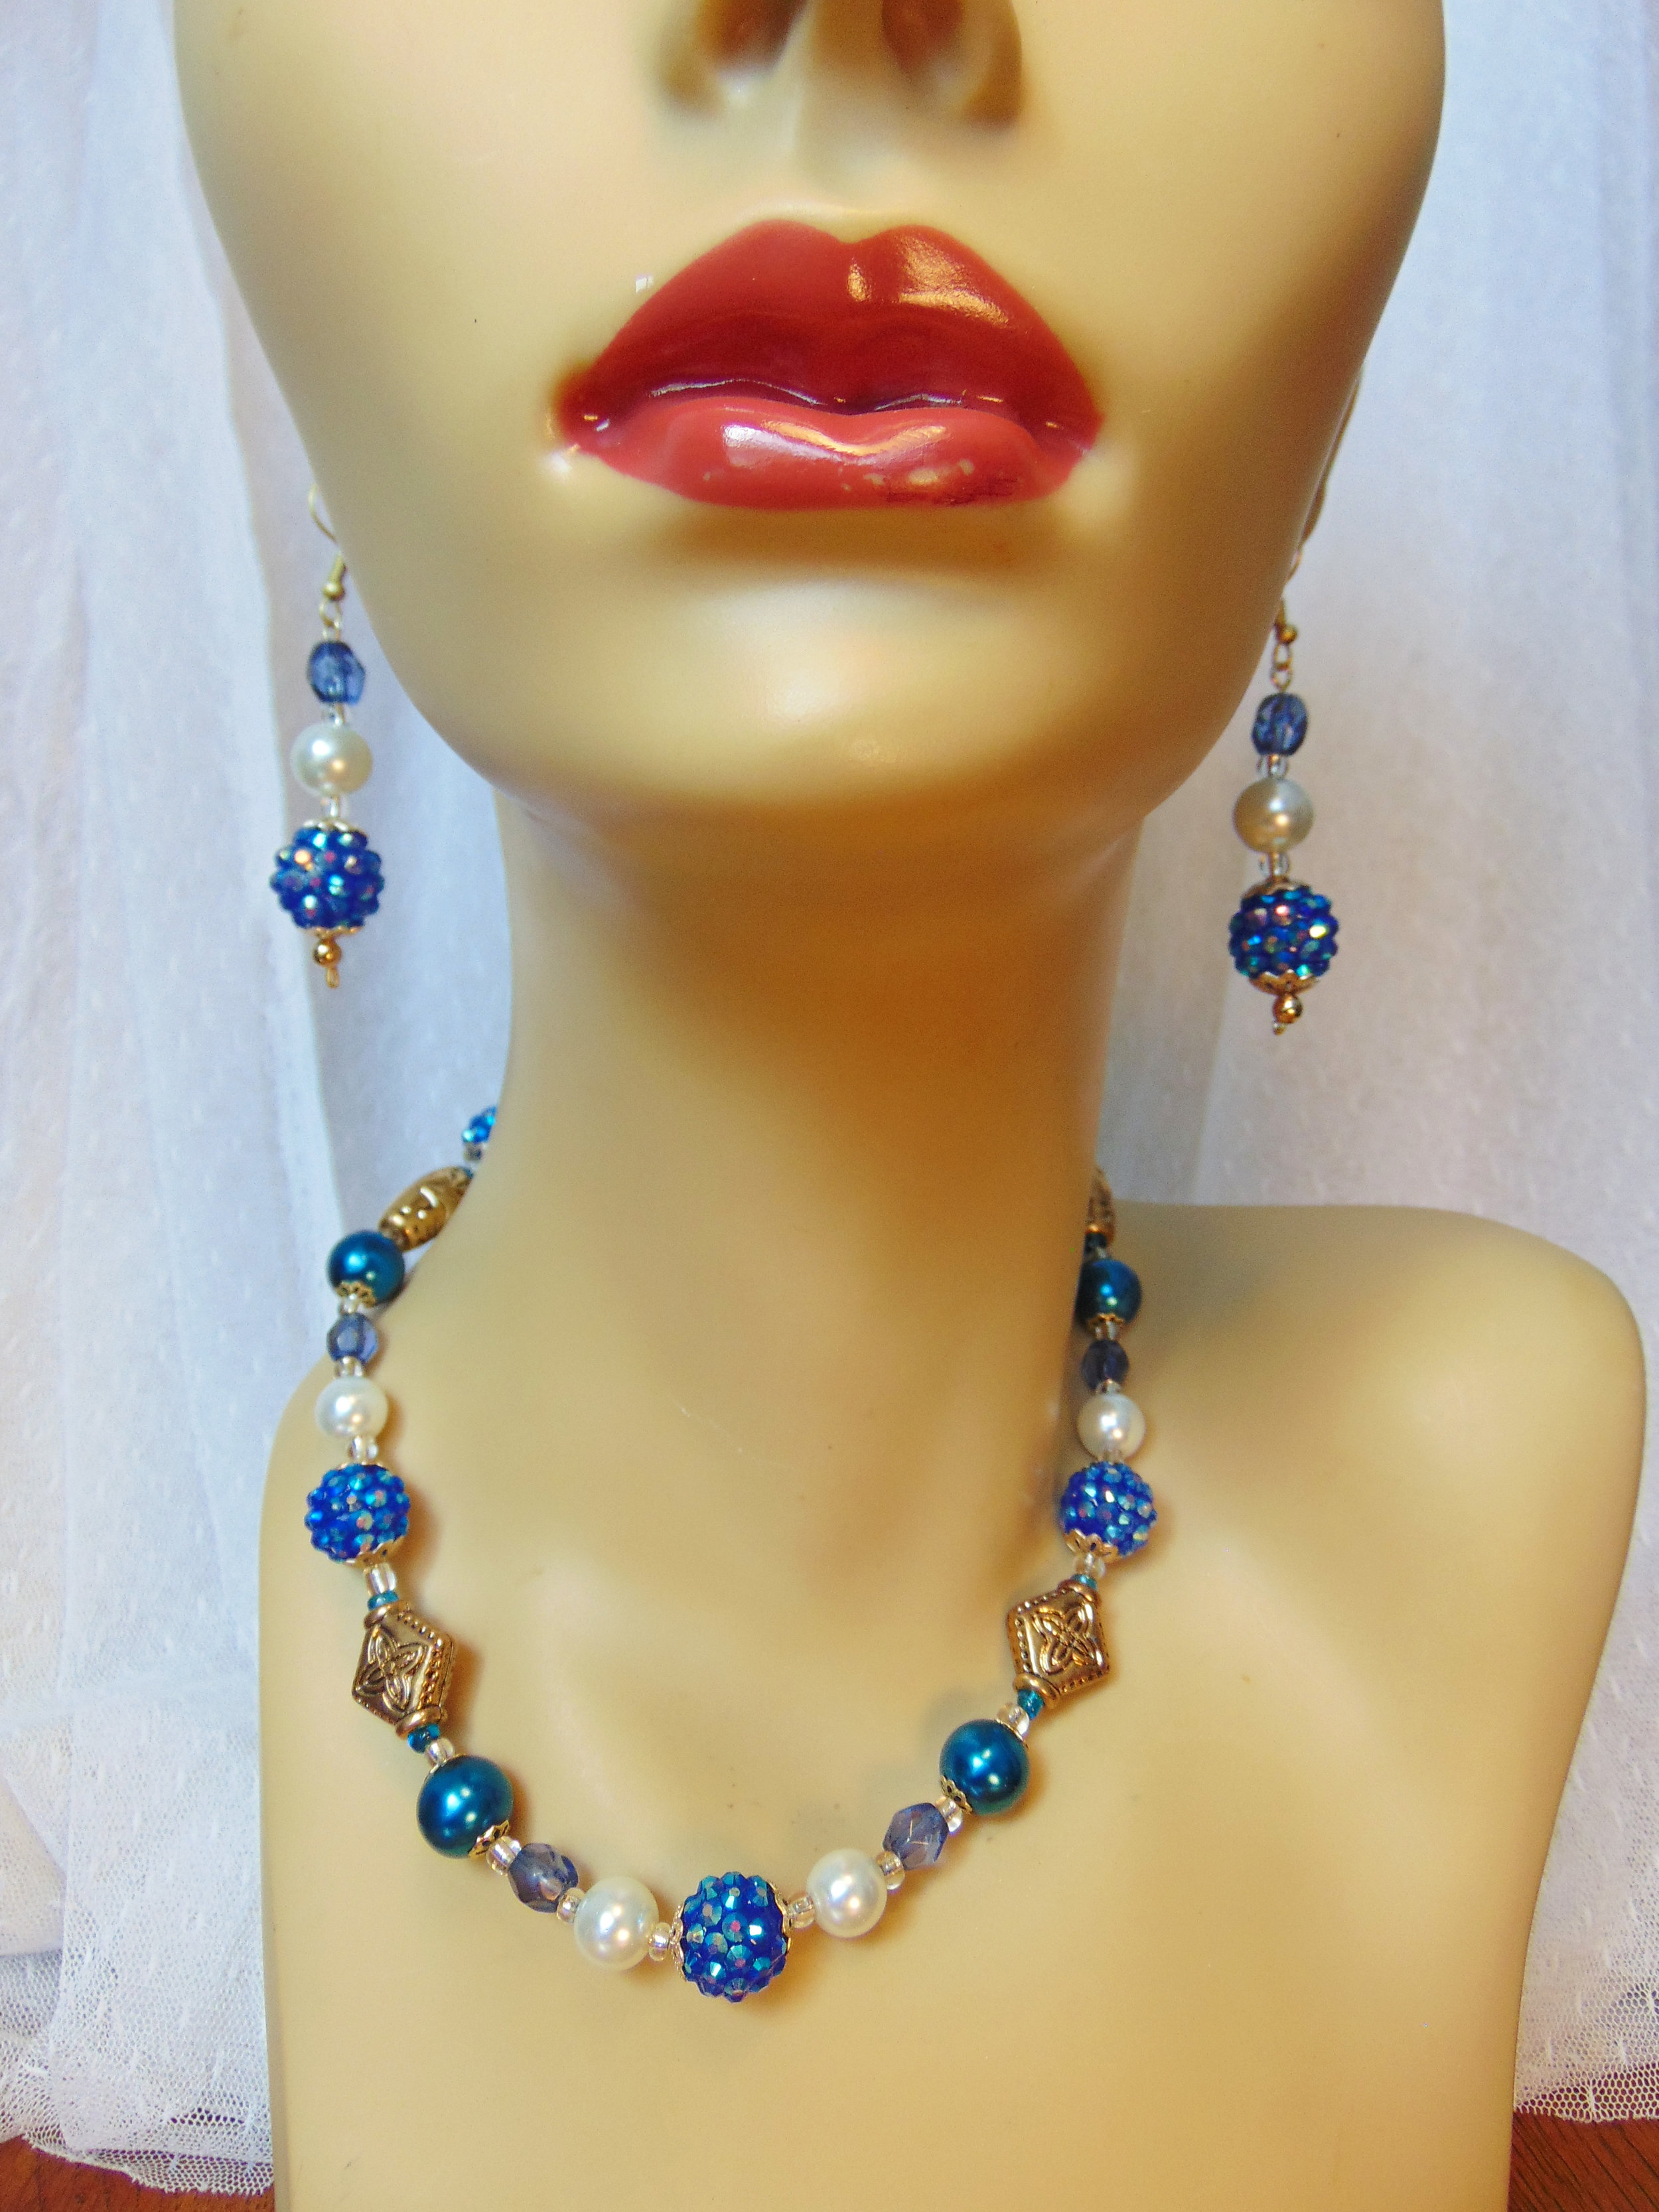 Handmade one of a kind necklace and earring sets by JMB Designs